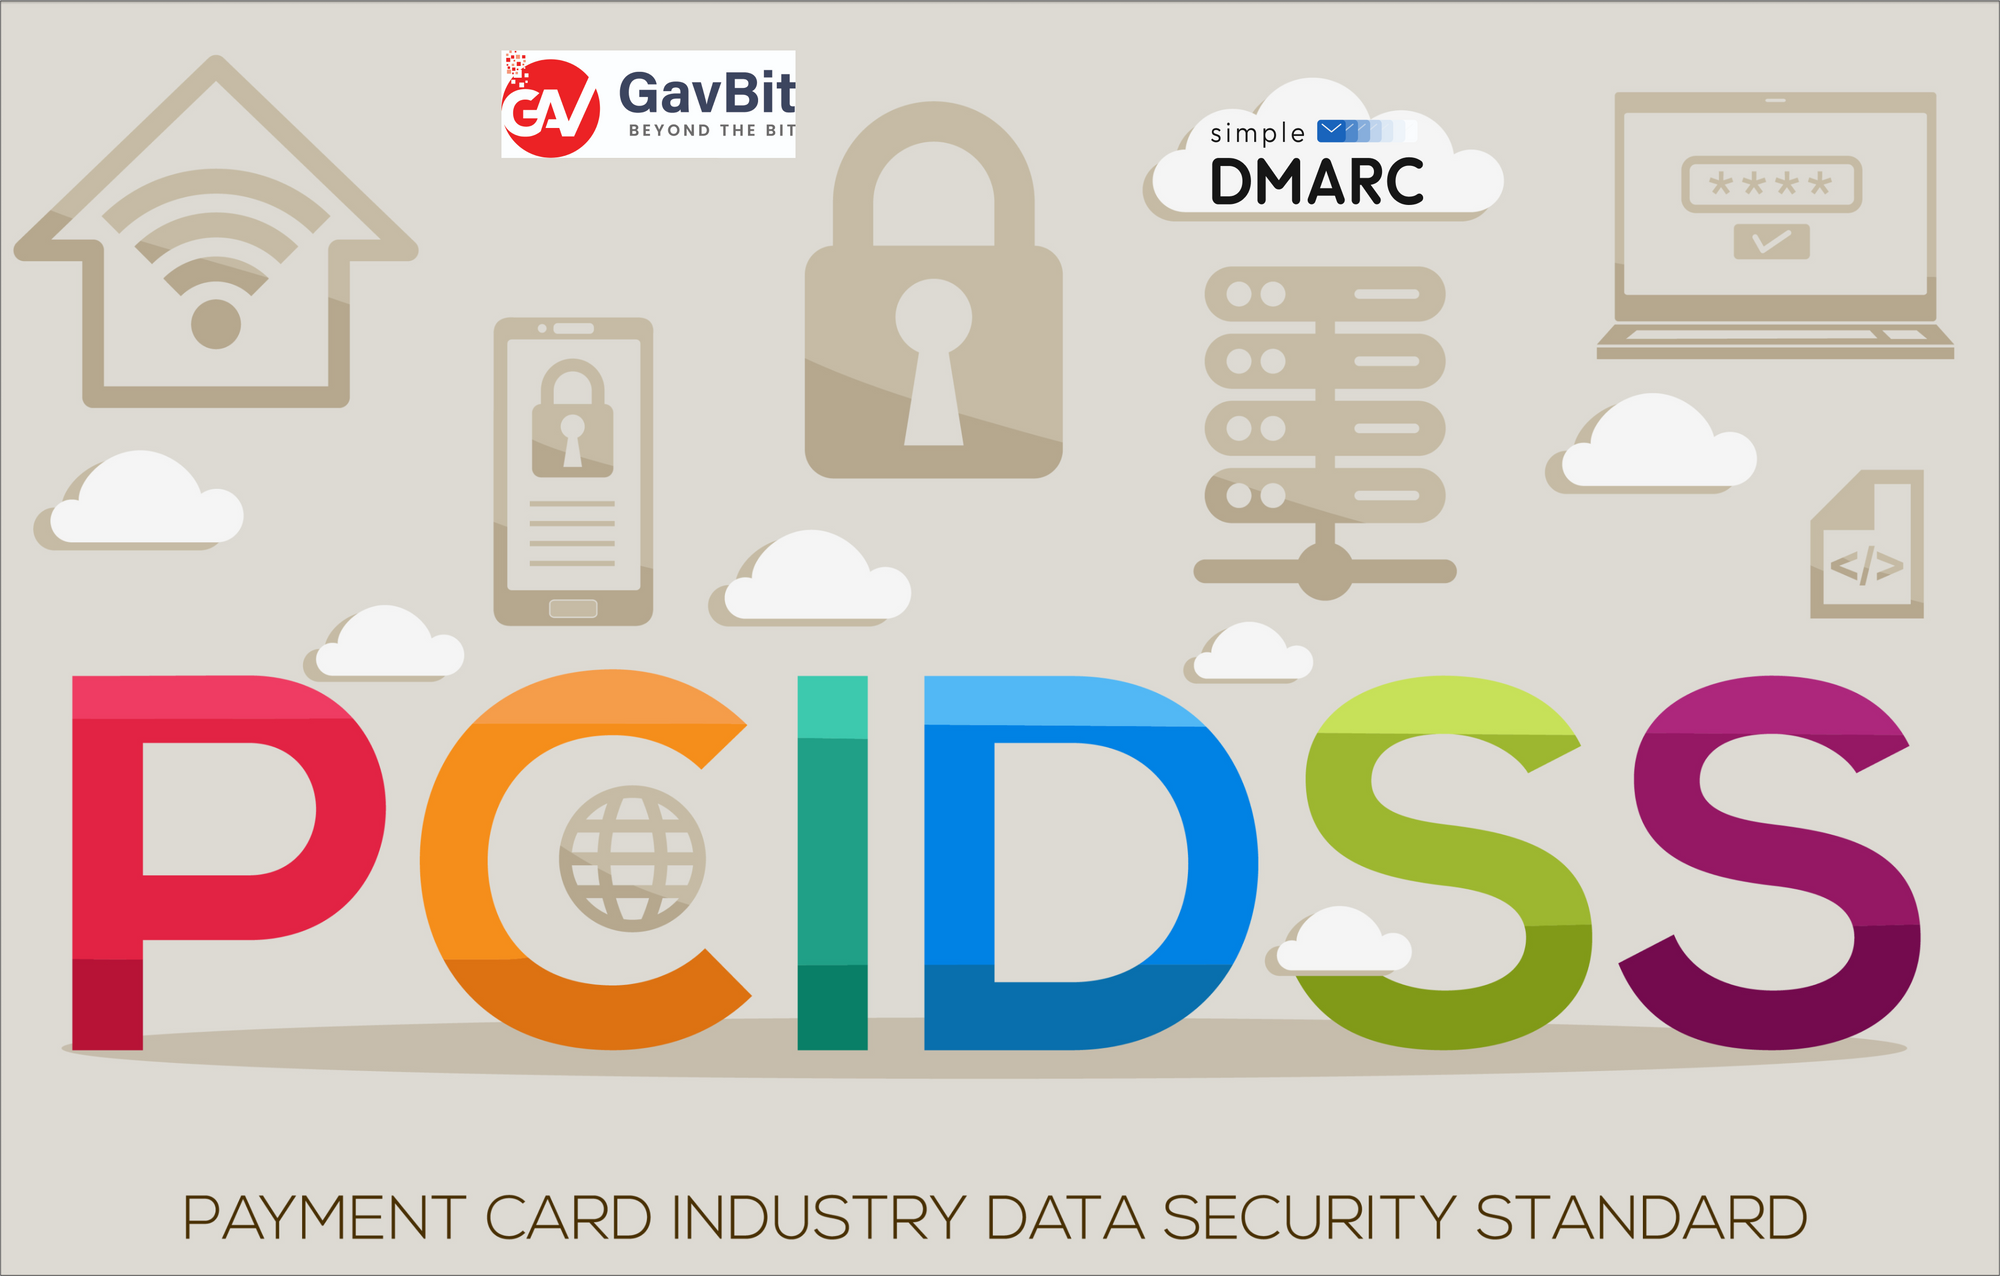 Get PCI DSS 4.0 Compliance with SimpleDMARC